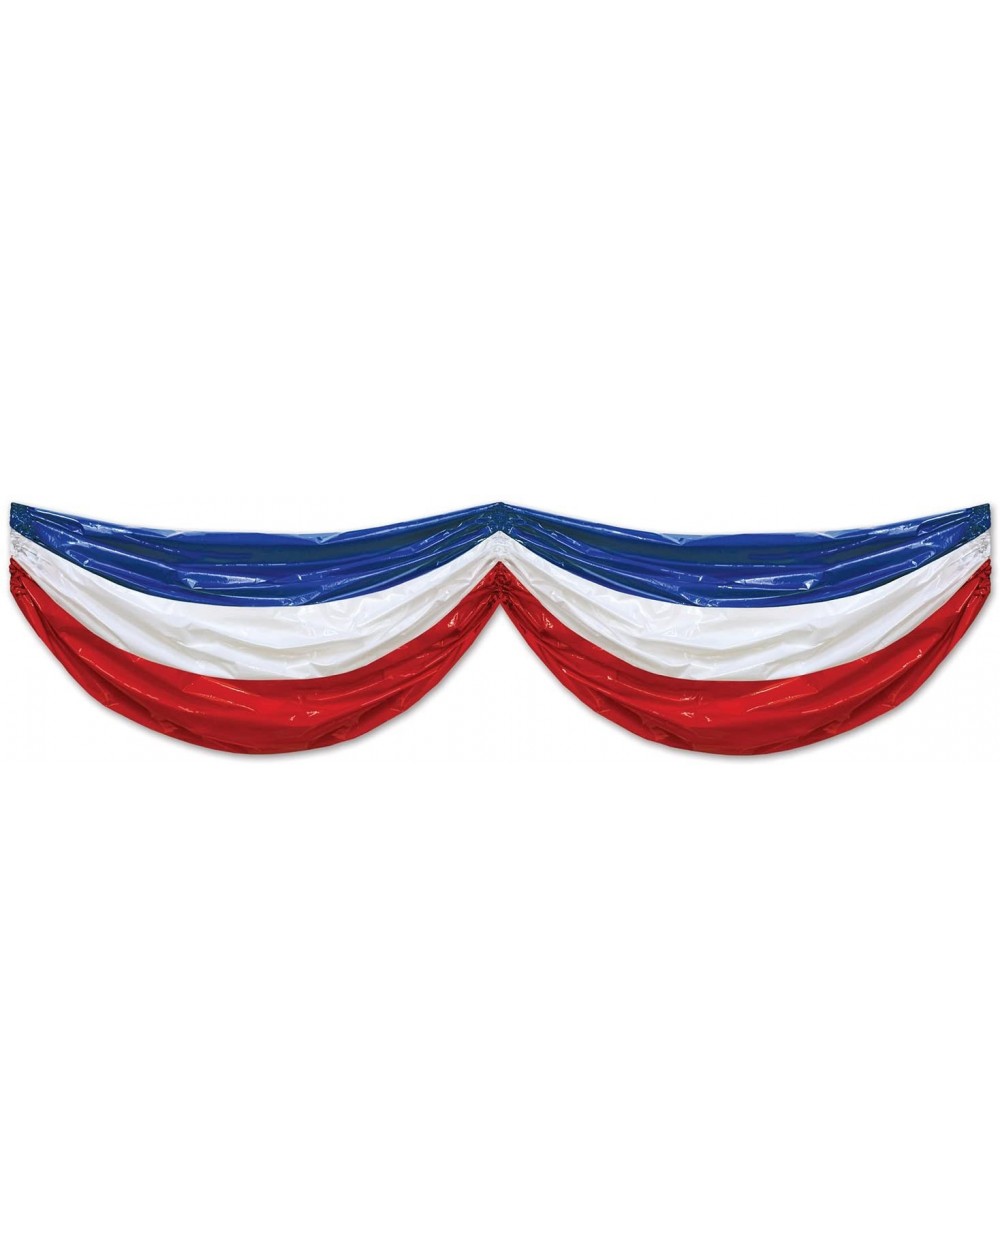 Streamers Patriotic Plastic Bunting- 3' x 15'- Red/White/Blue - CE120AM48DN $16.23